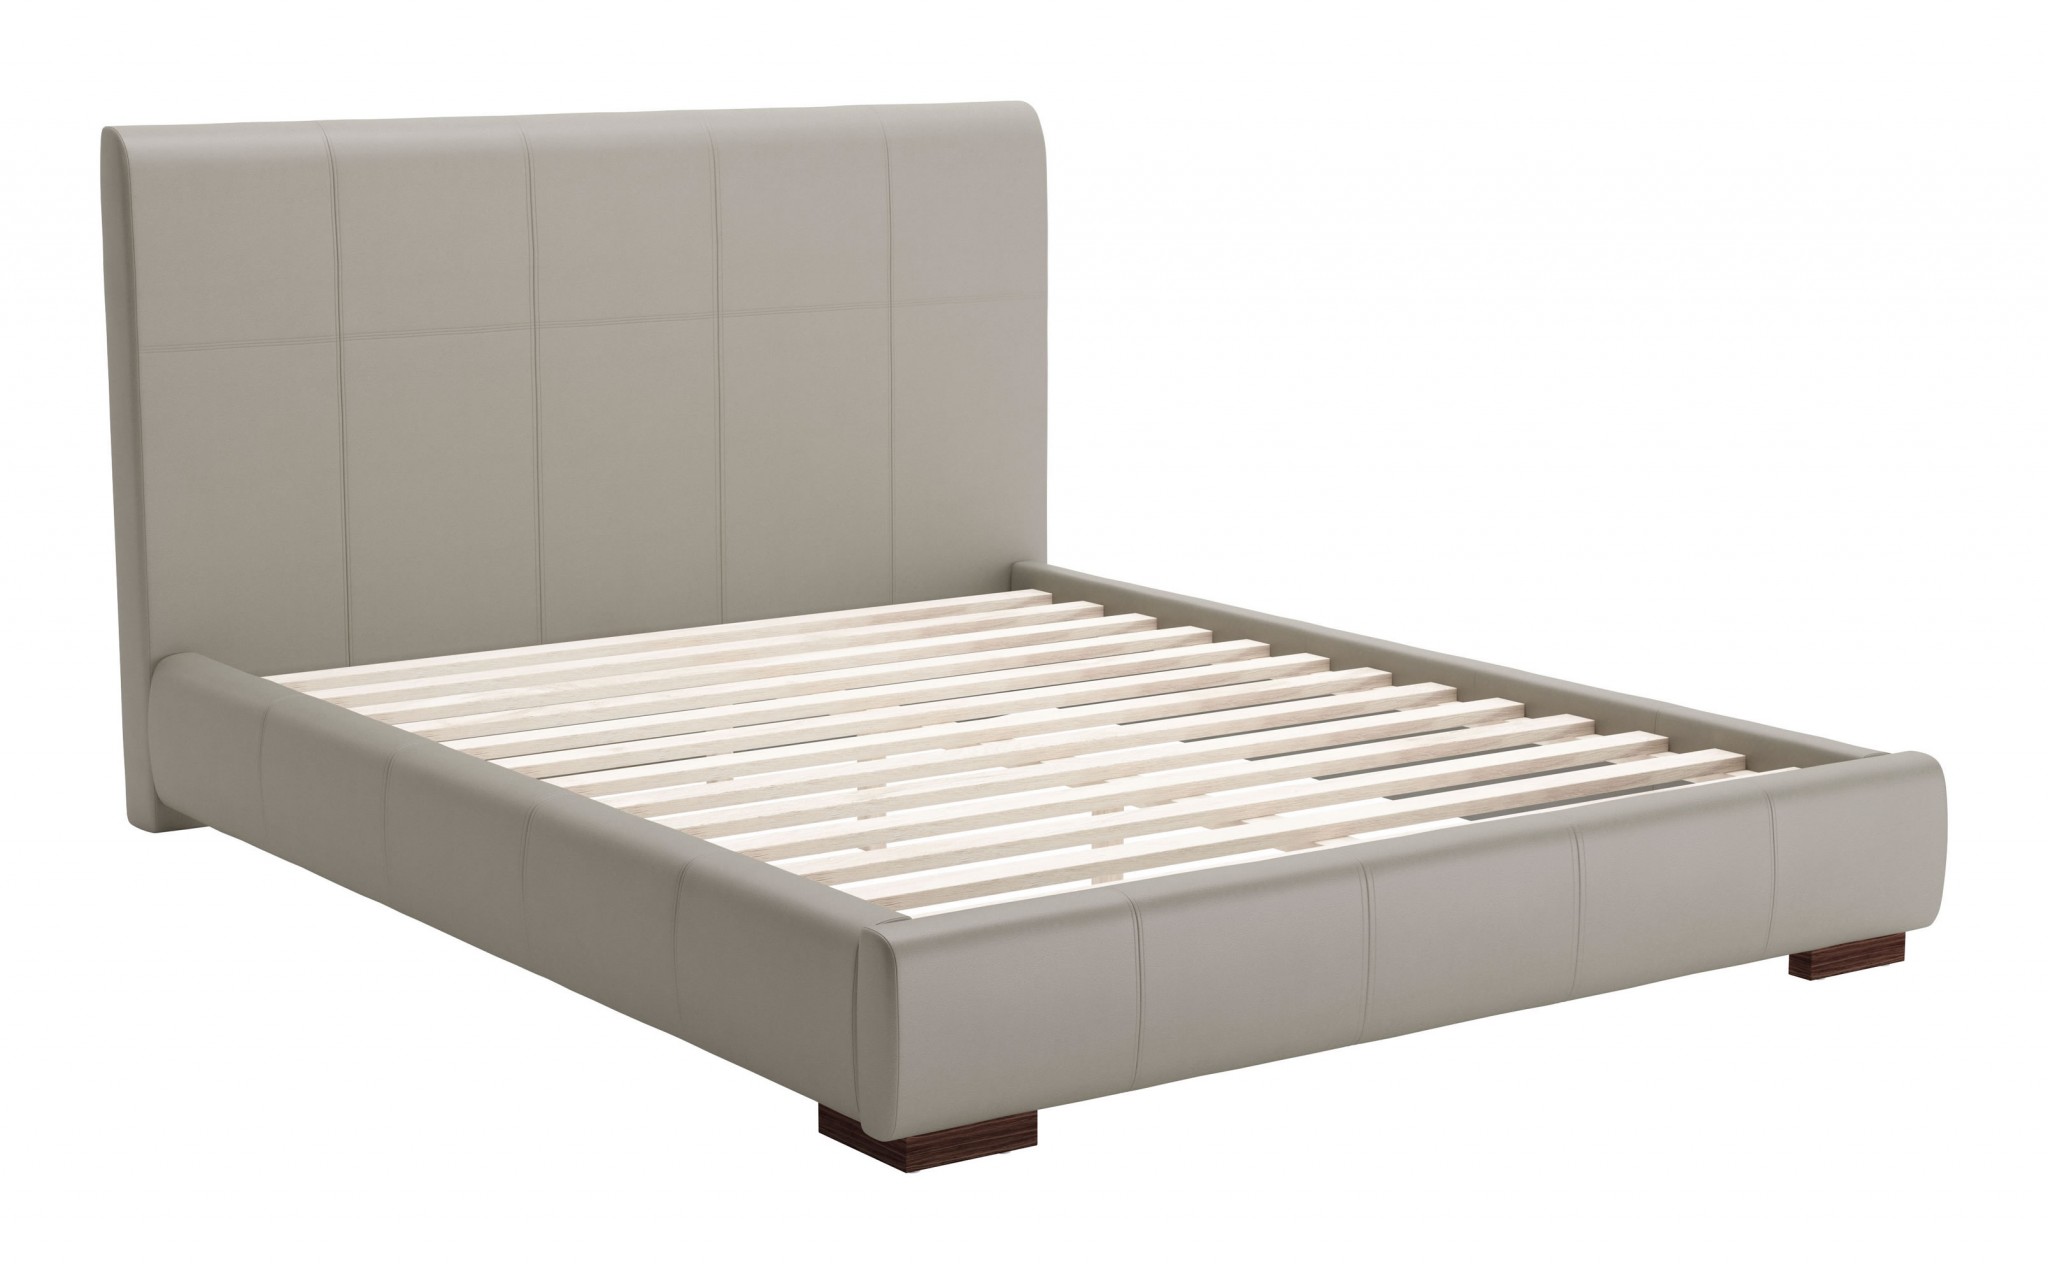 68.5" x 88.6" x 43.5" Gray, Leatherette, Plywood, MDF, Queen Bed